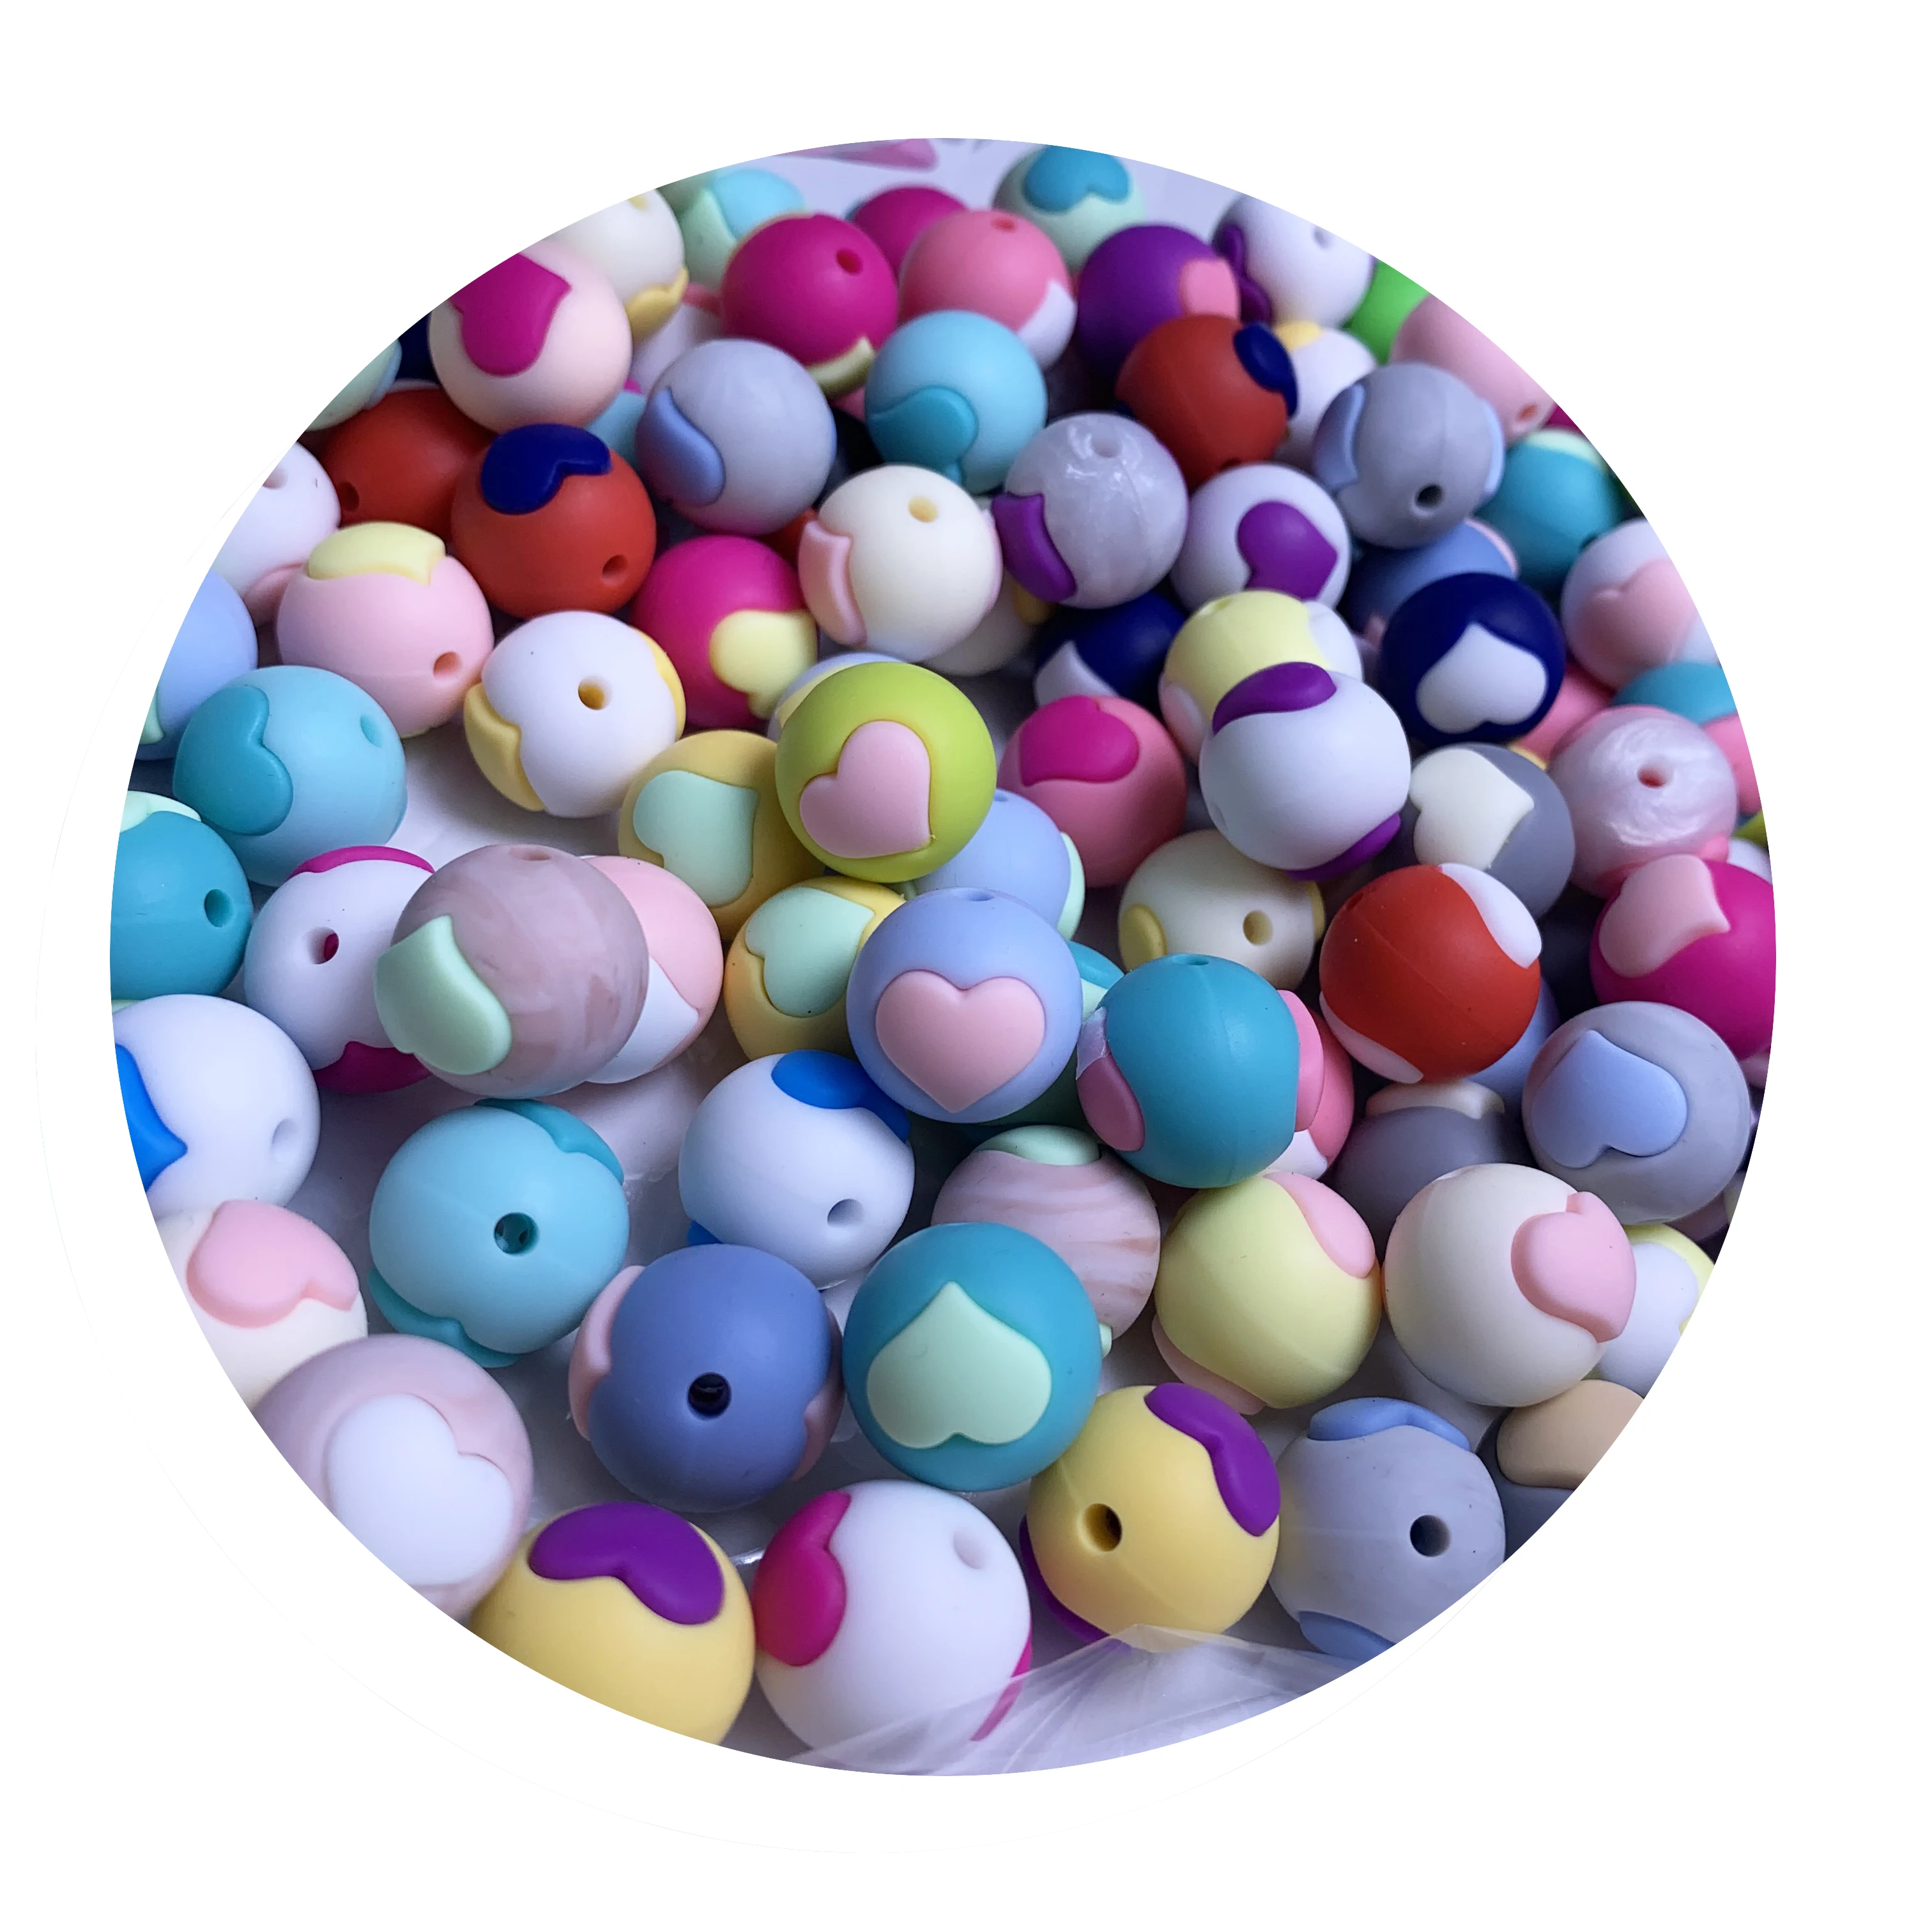 

Wholesale Bulk BPA Free Food Grade wooden Sensory Teether Toys Loose Beads  New baby beads silicone